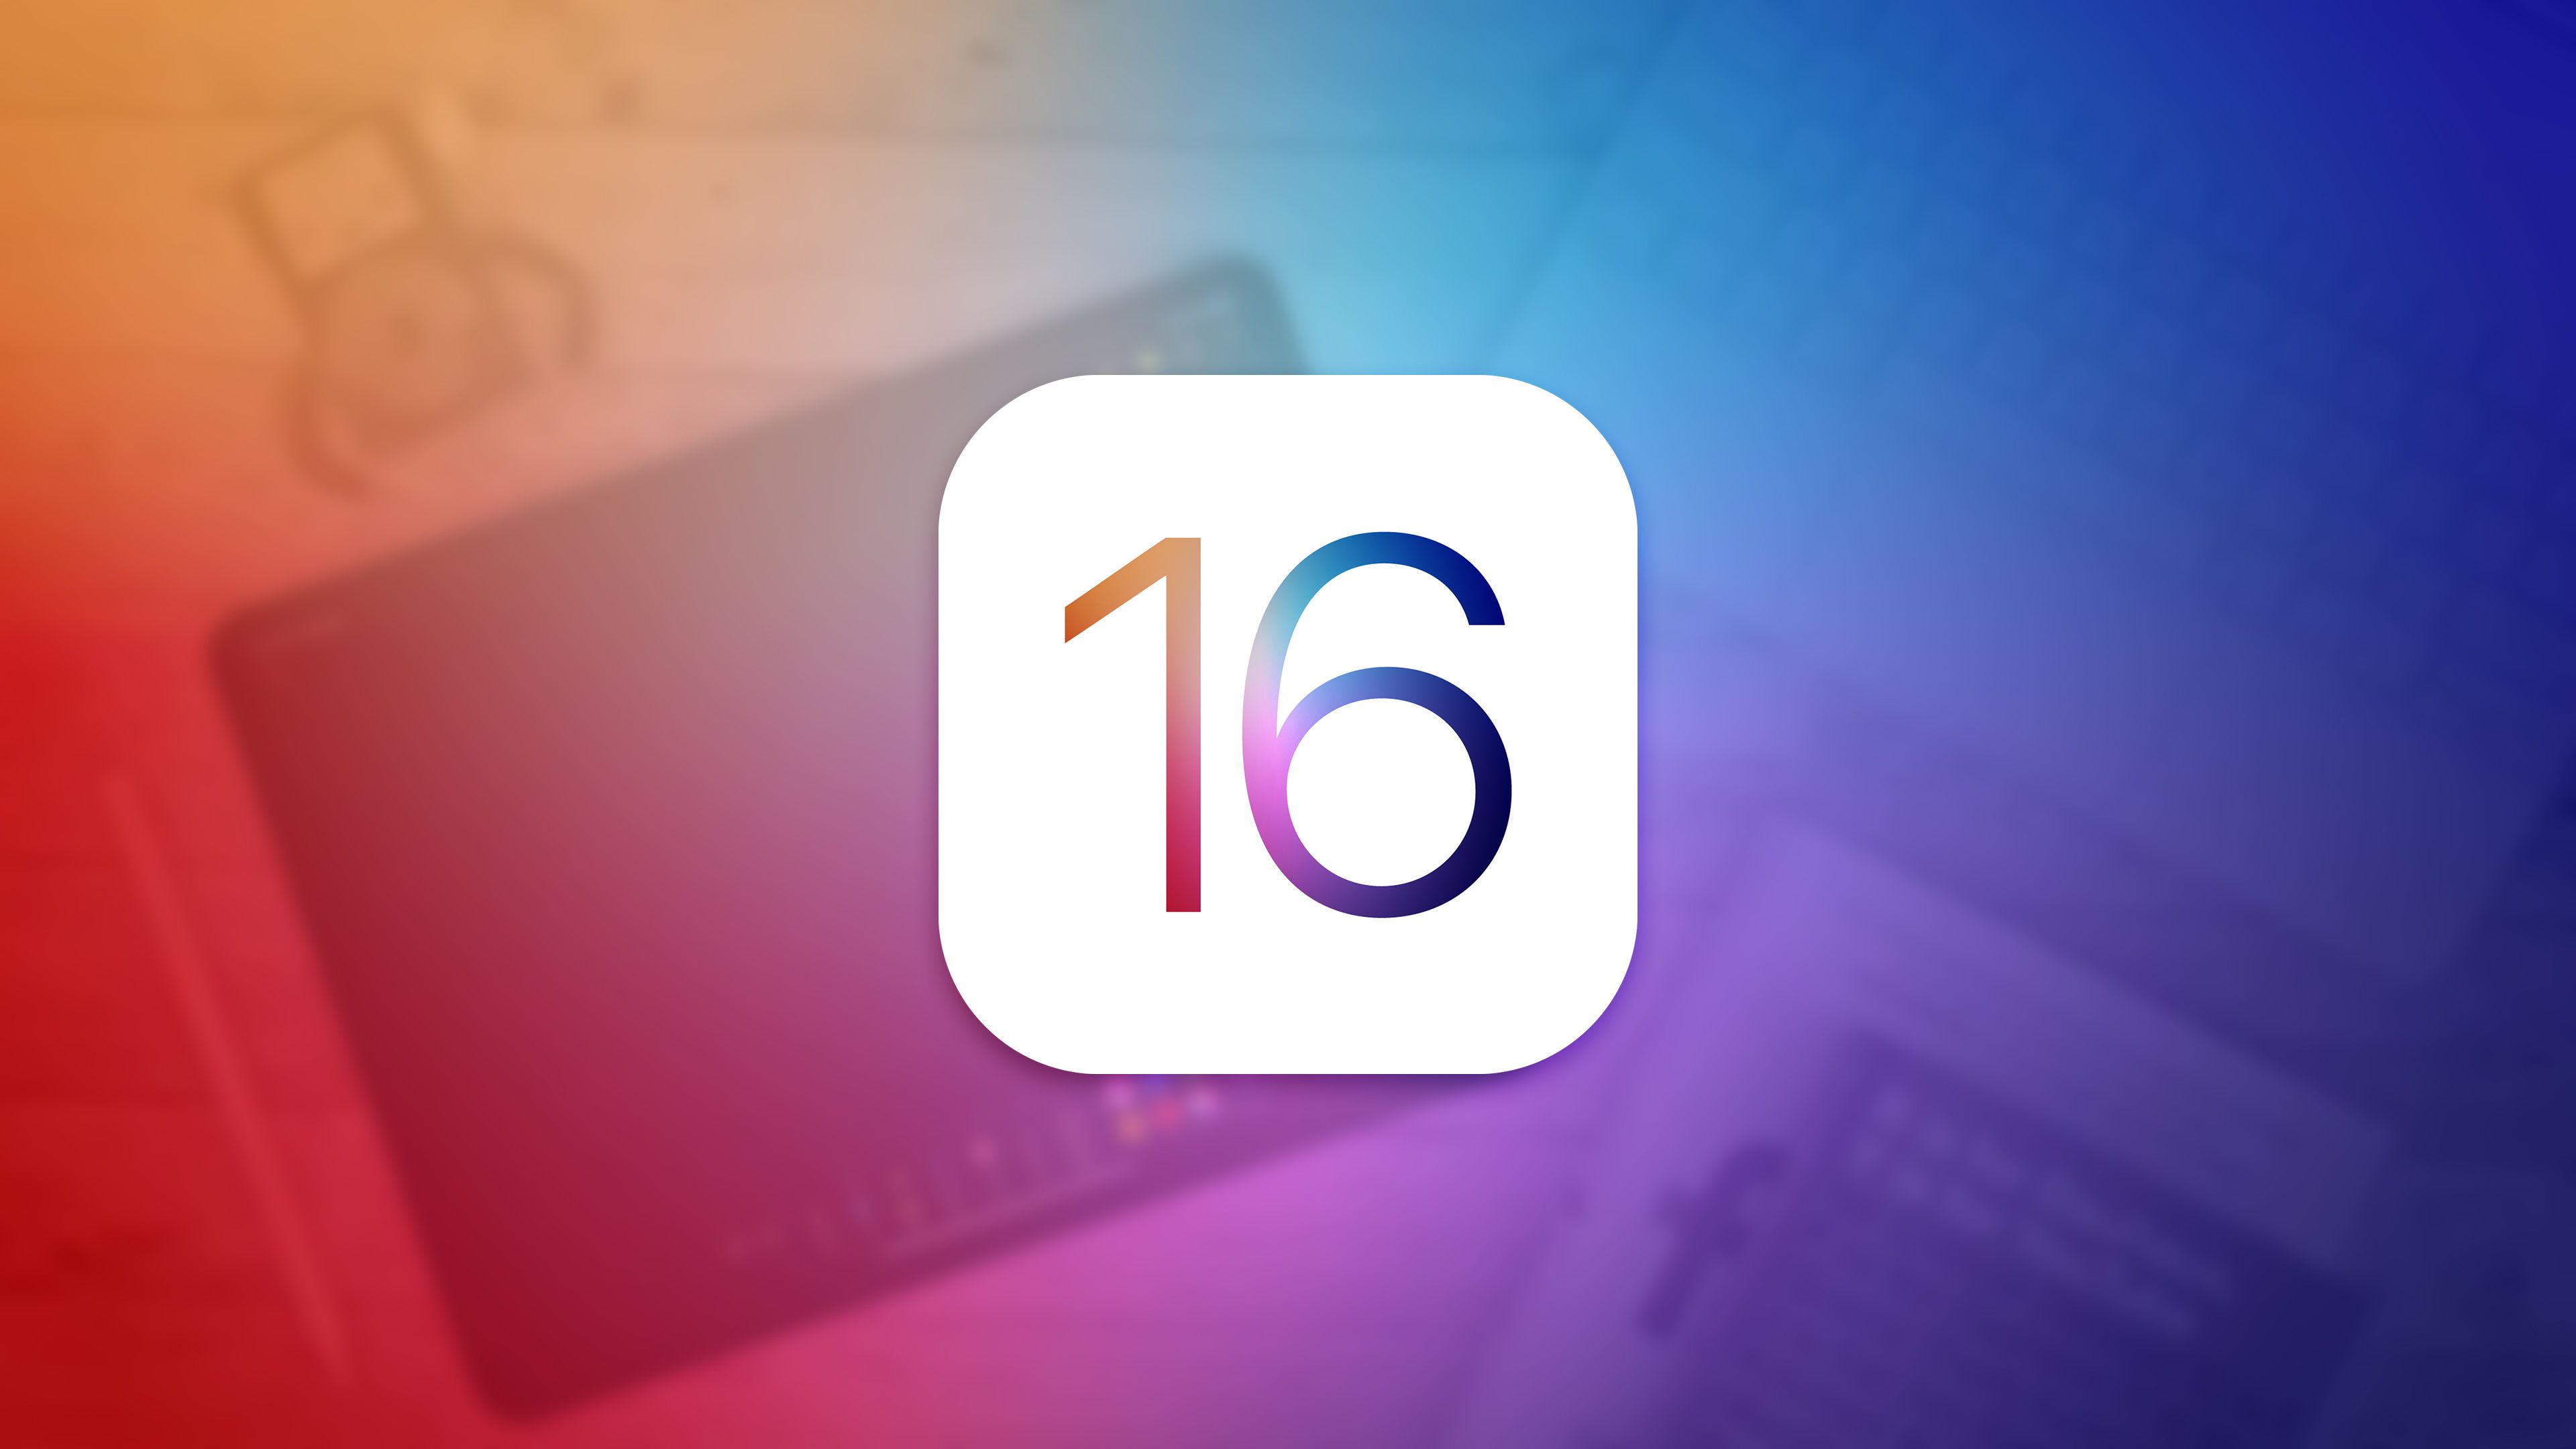 With WWDC Six Months Away, What Do You Want to See in iOS 16?